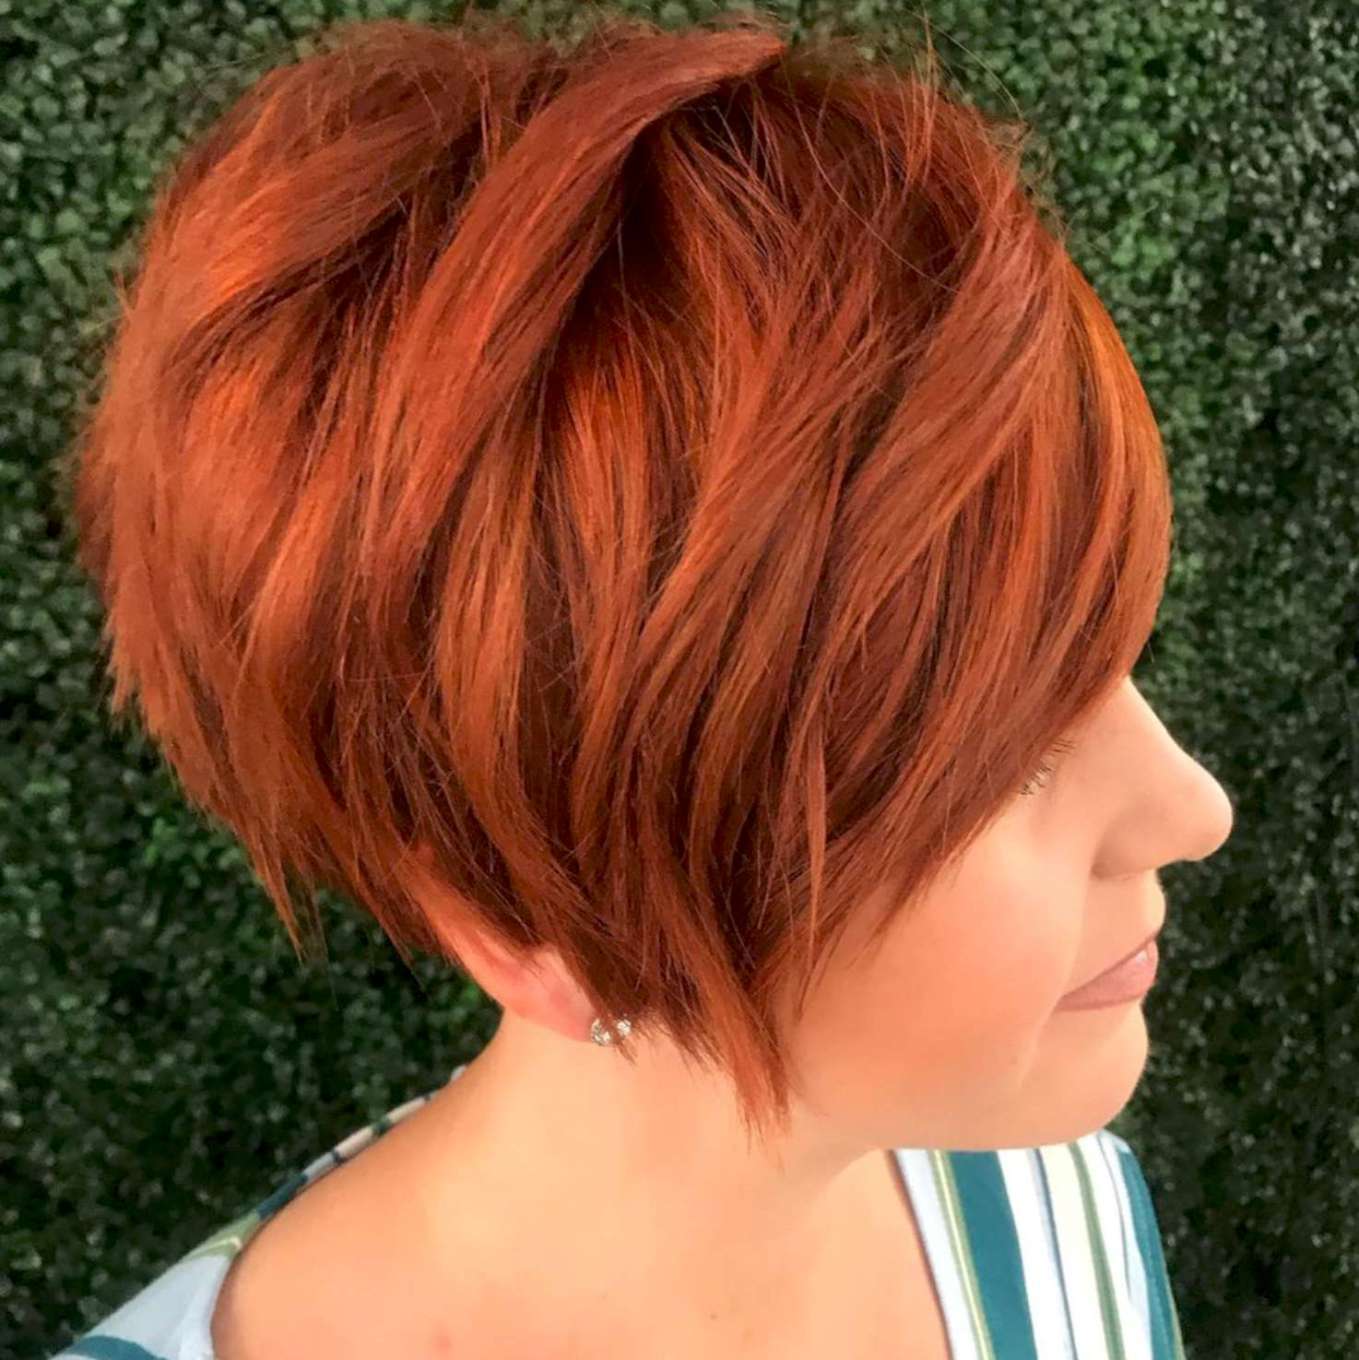 2020 Red Short Hairstyles – 3